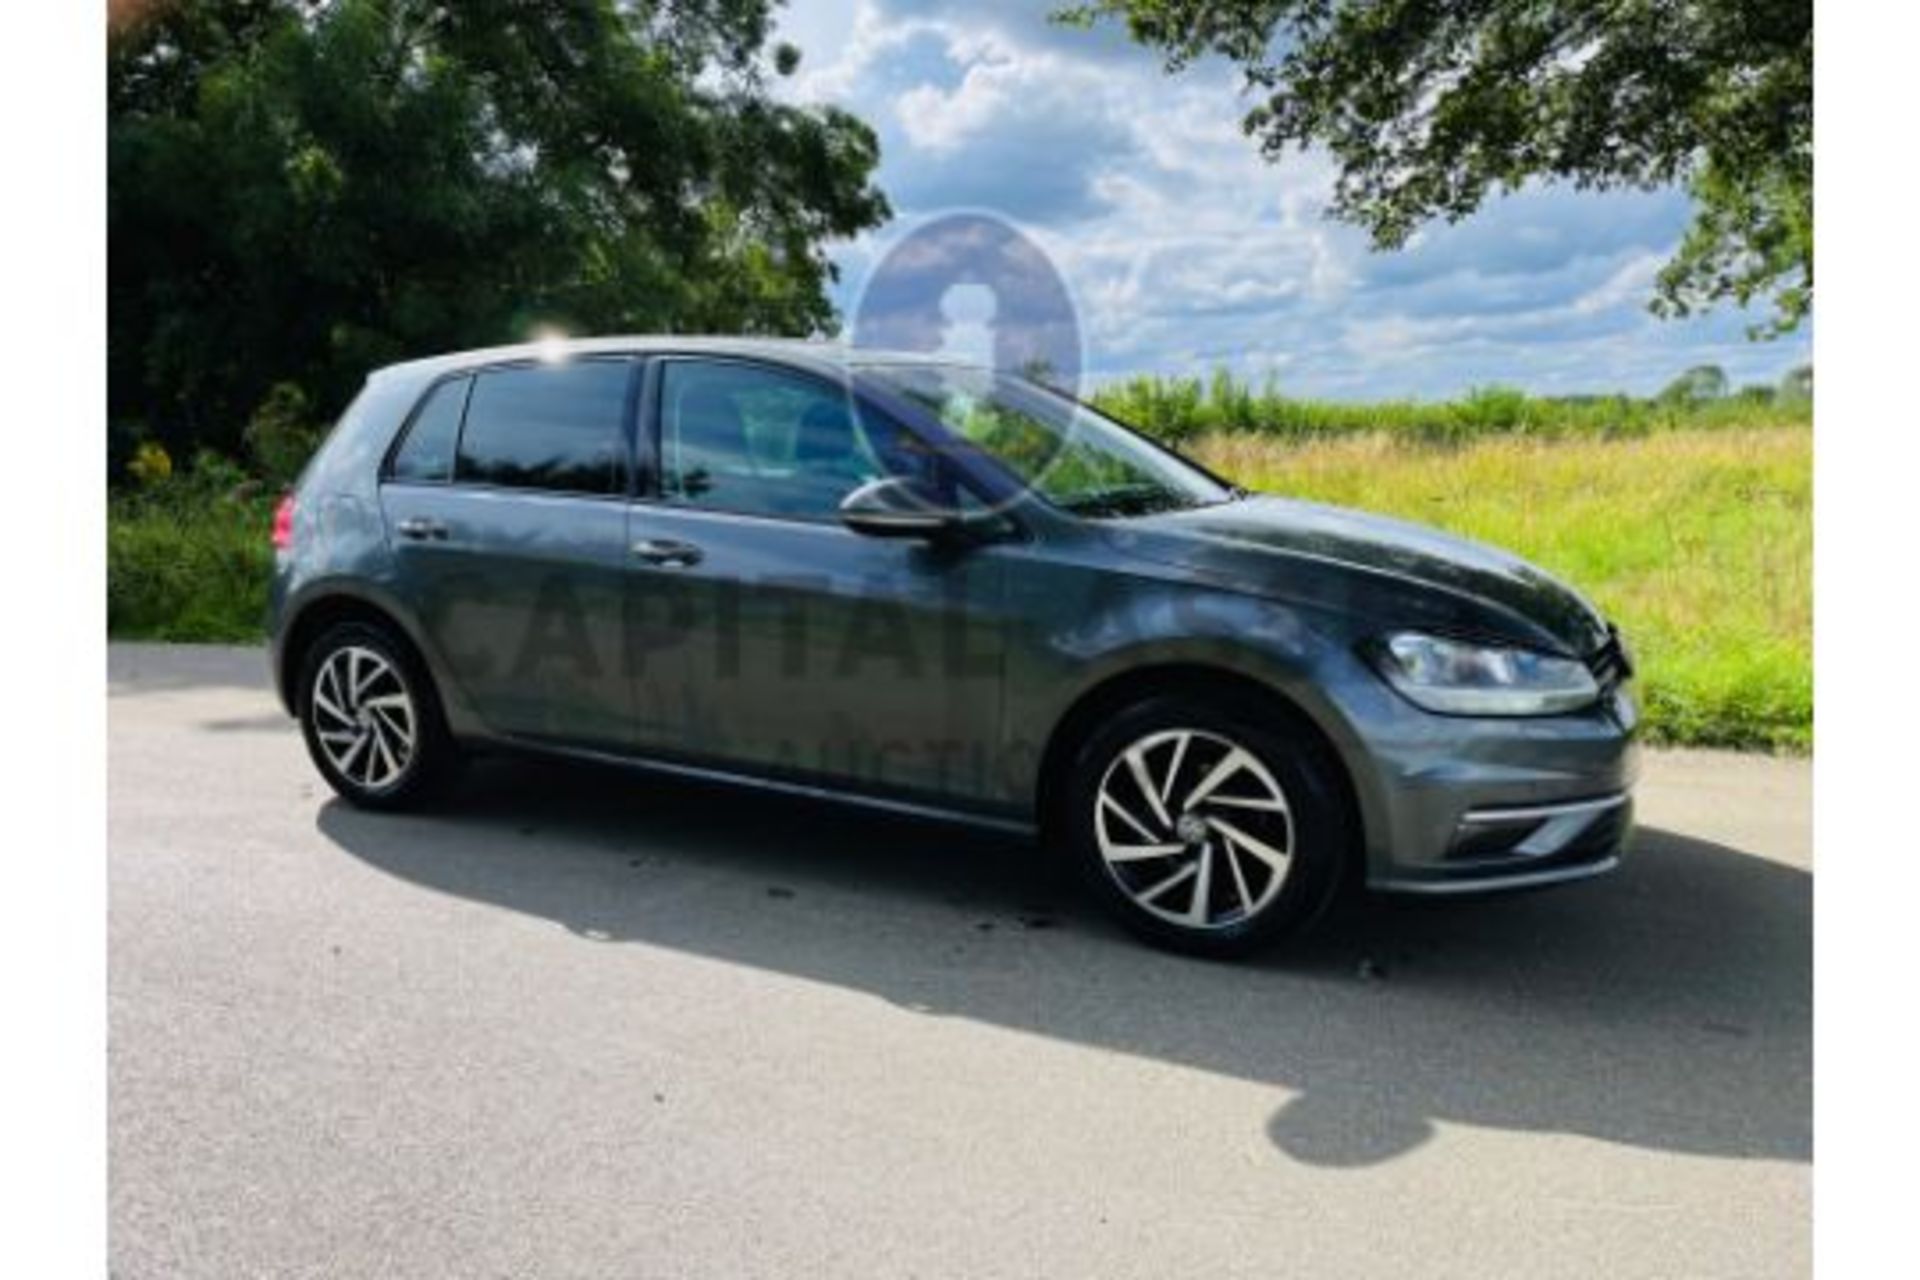 VOLKSWAGEN GOLF "MATCH" 1.6 TDI - 19 REG - 1 OWNER - SAT NAV - CRUISE CONTROL - AIR CON - ONLY 72K - Image 7 of 34